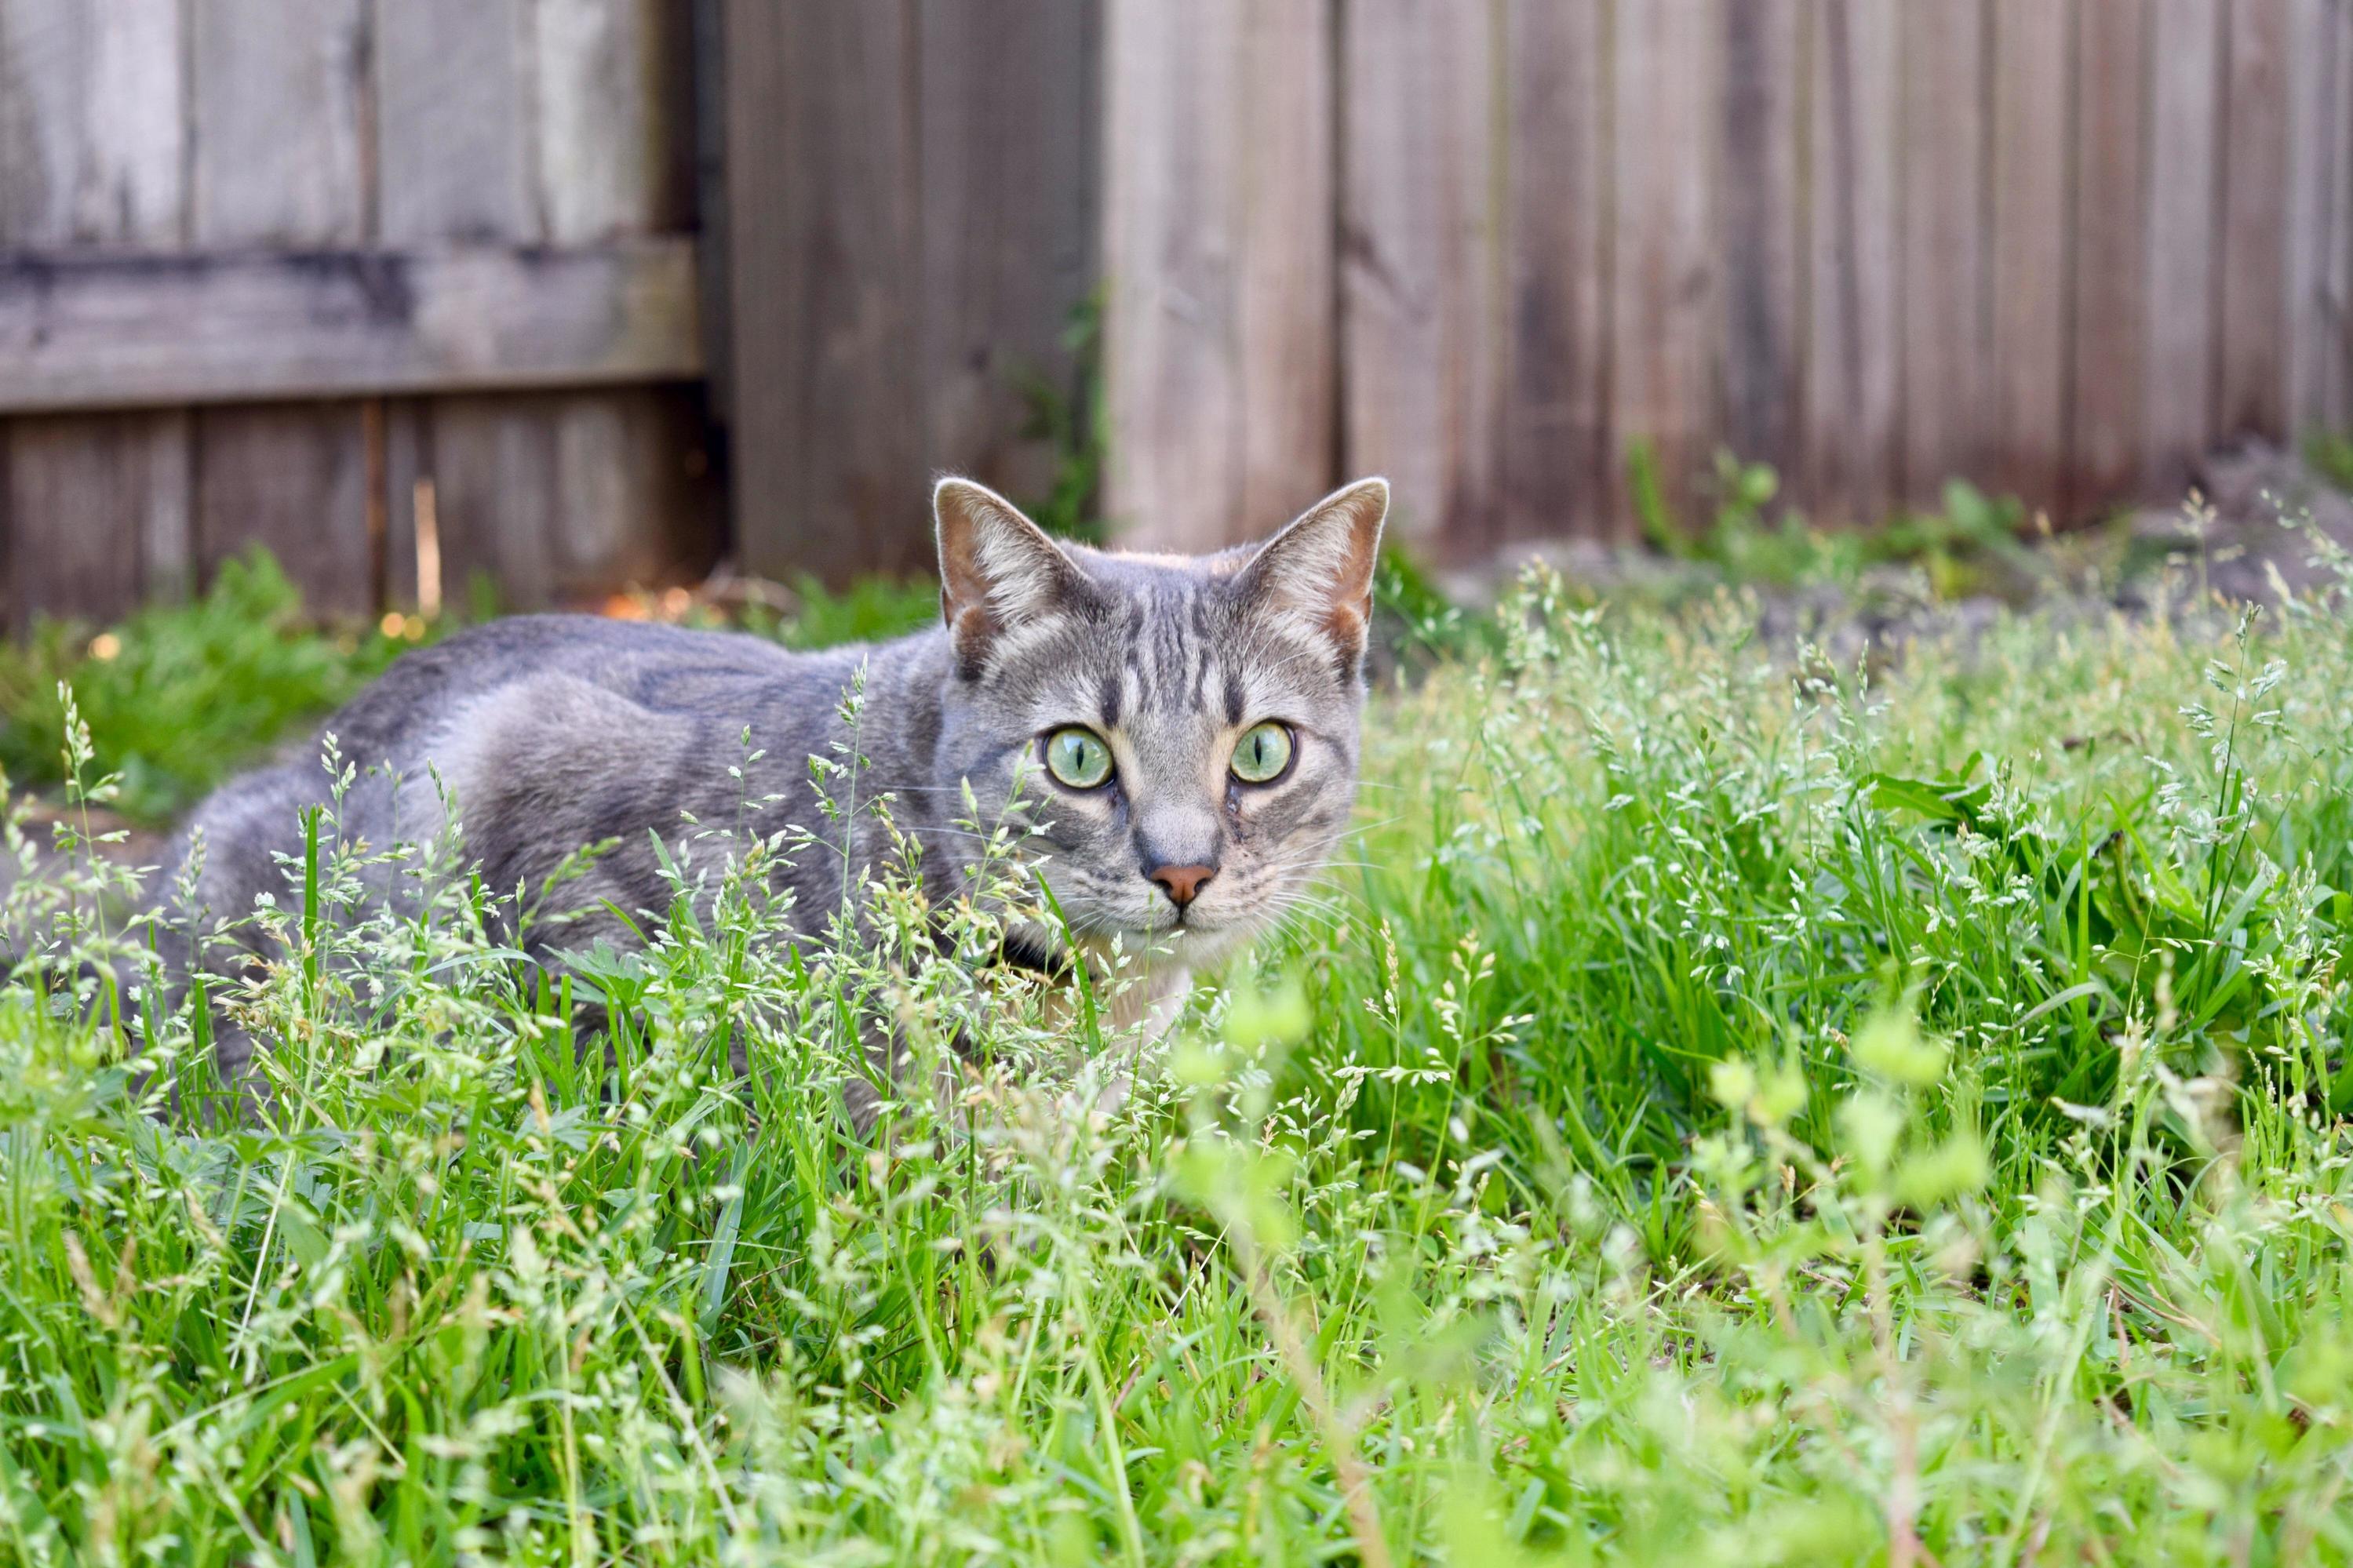 An indoor cat getting acquainted with the wild wild back yard